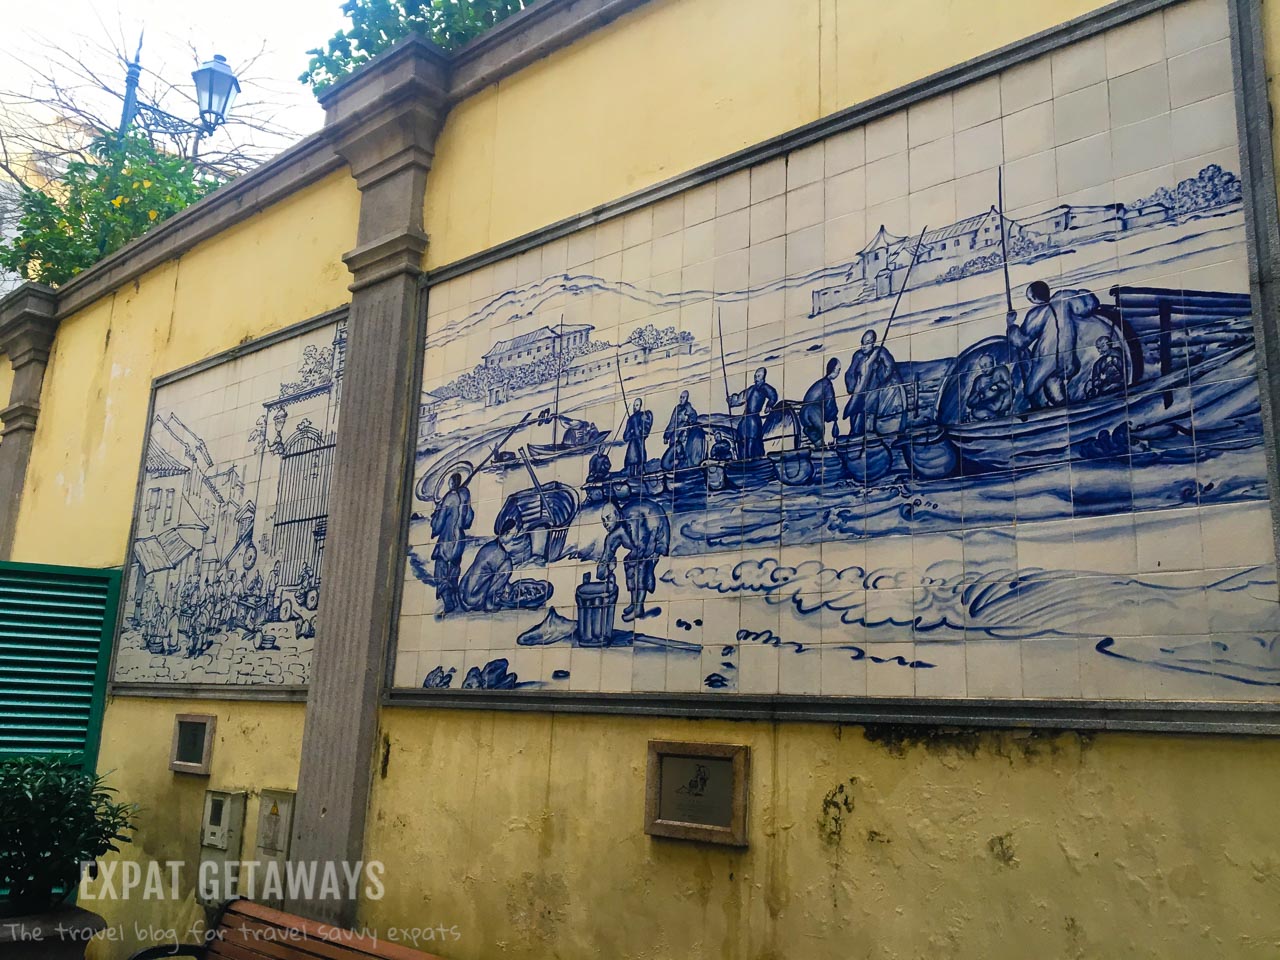 Tiled murals dating back to the 1800s depict a quieter life in Portuguese Macau. 